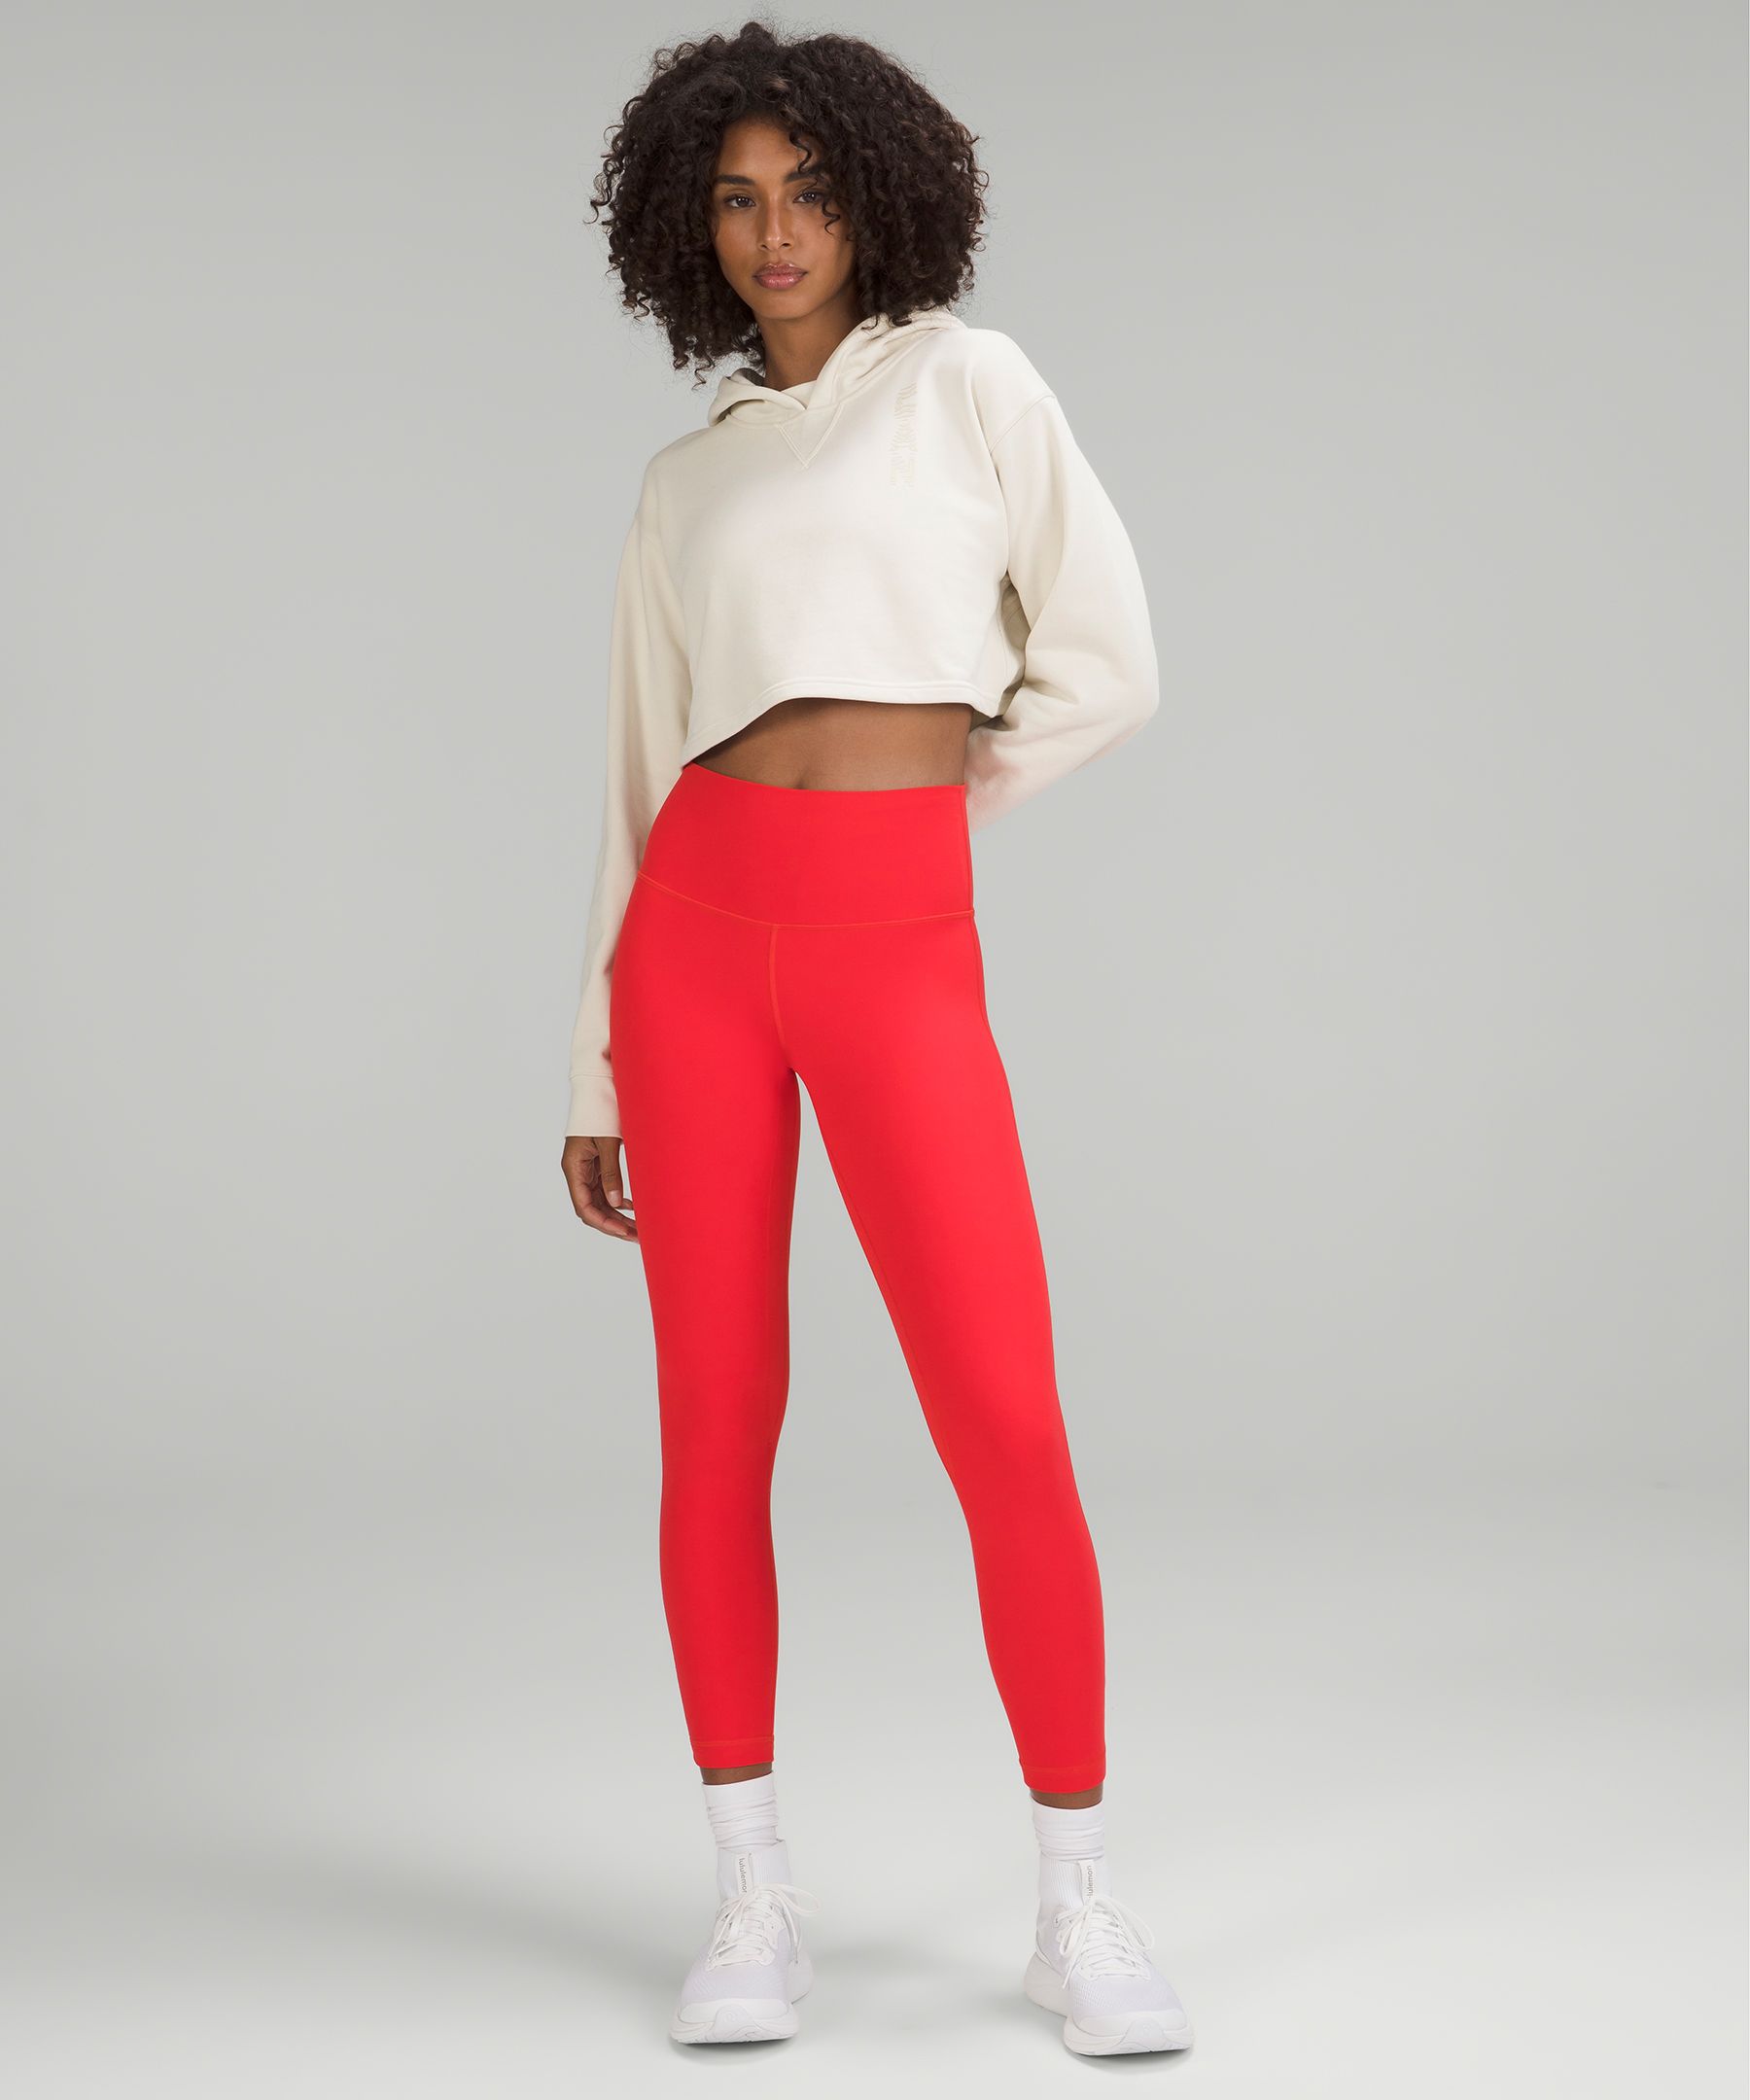 Lululemon Align Ribbed 25” Red Size 10 - $55 (53% Off Retail) New